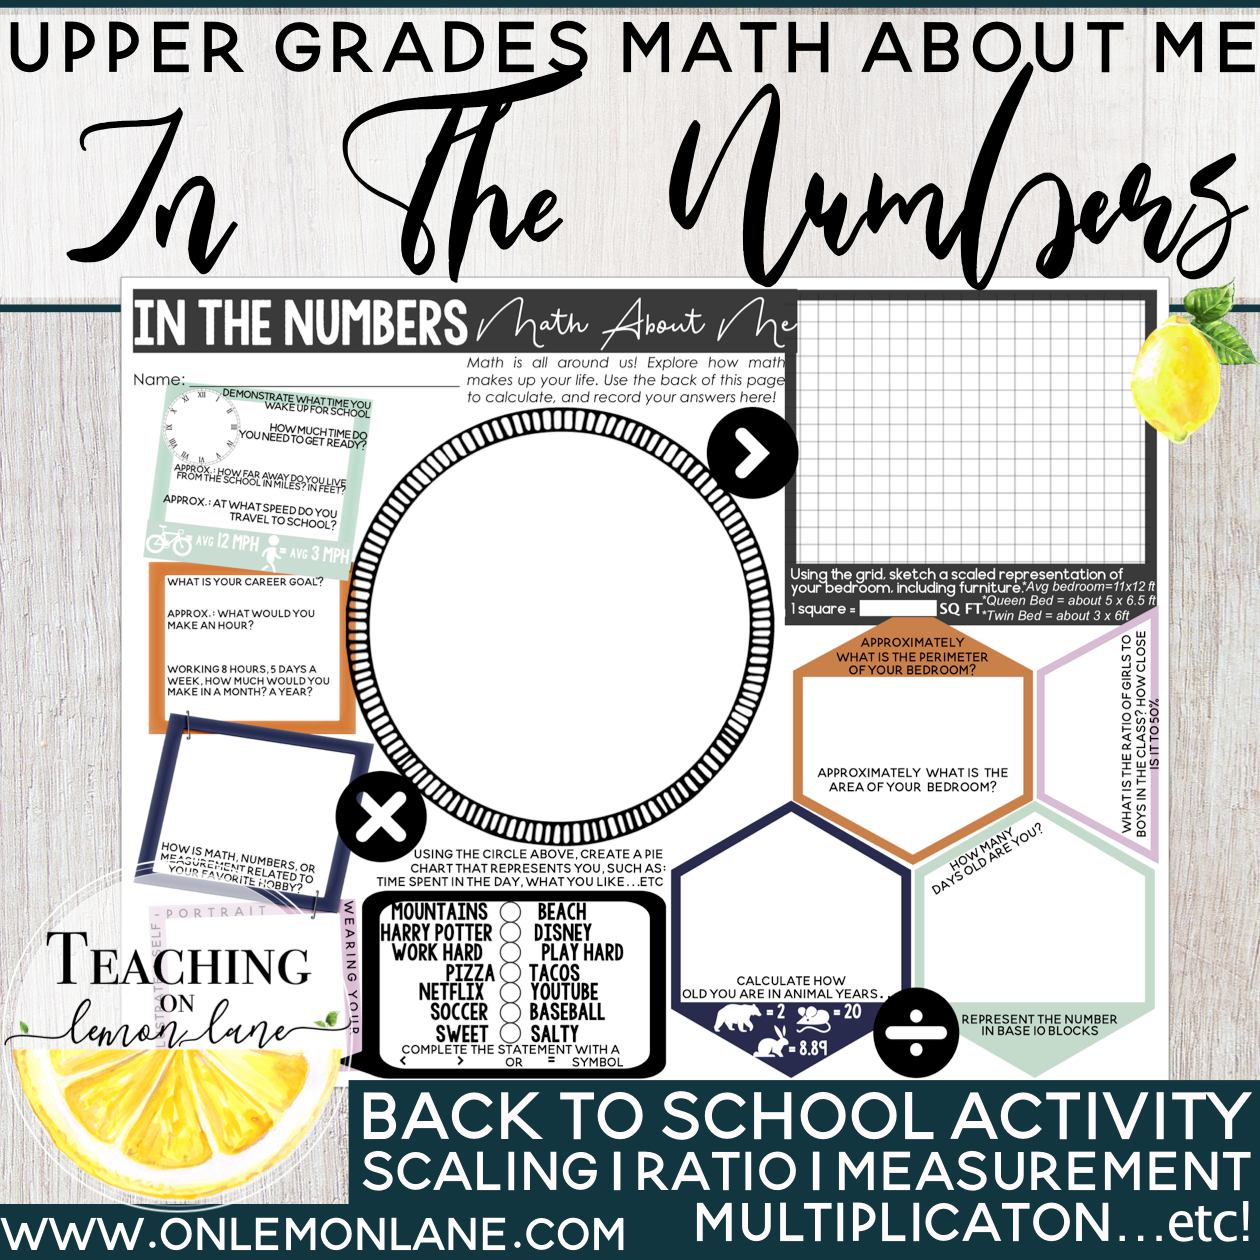 Math About Me Upper Grades Activity Poster Back To School Math All 